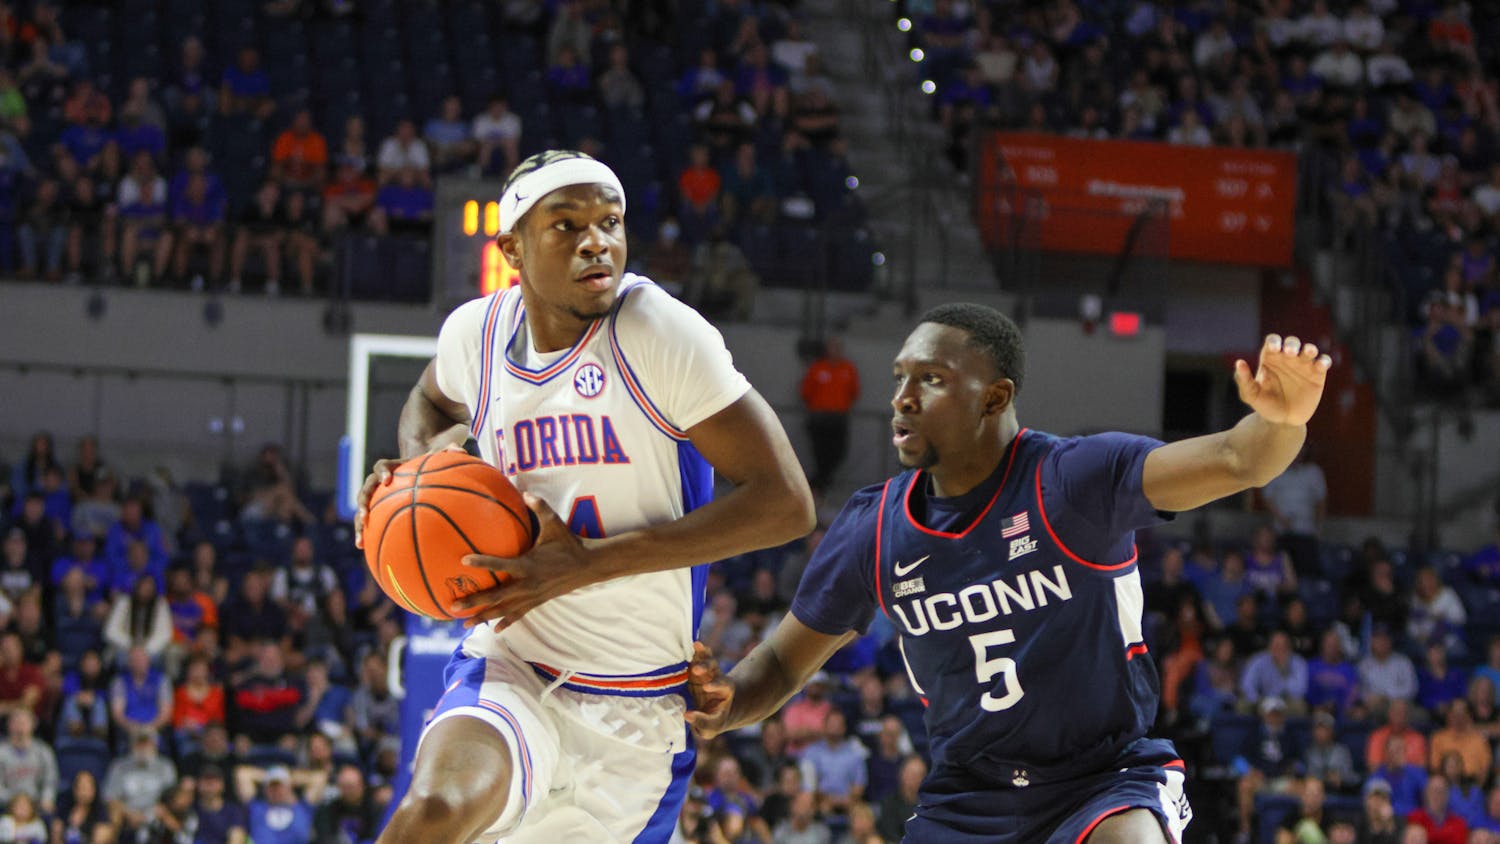 Sophomore guard Kowacie Reeves handles the ball in Florida's 75-54 loss to the No. 5 Connecticut Huskies Wednesday, Dec. 7, 2022. Reeves ended the game with 20 points against the Ohio Bobcats Wednesday, Dec. 14, 2022.